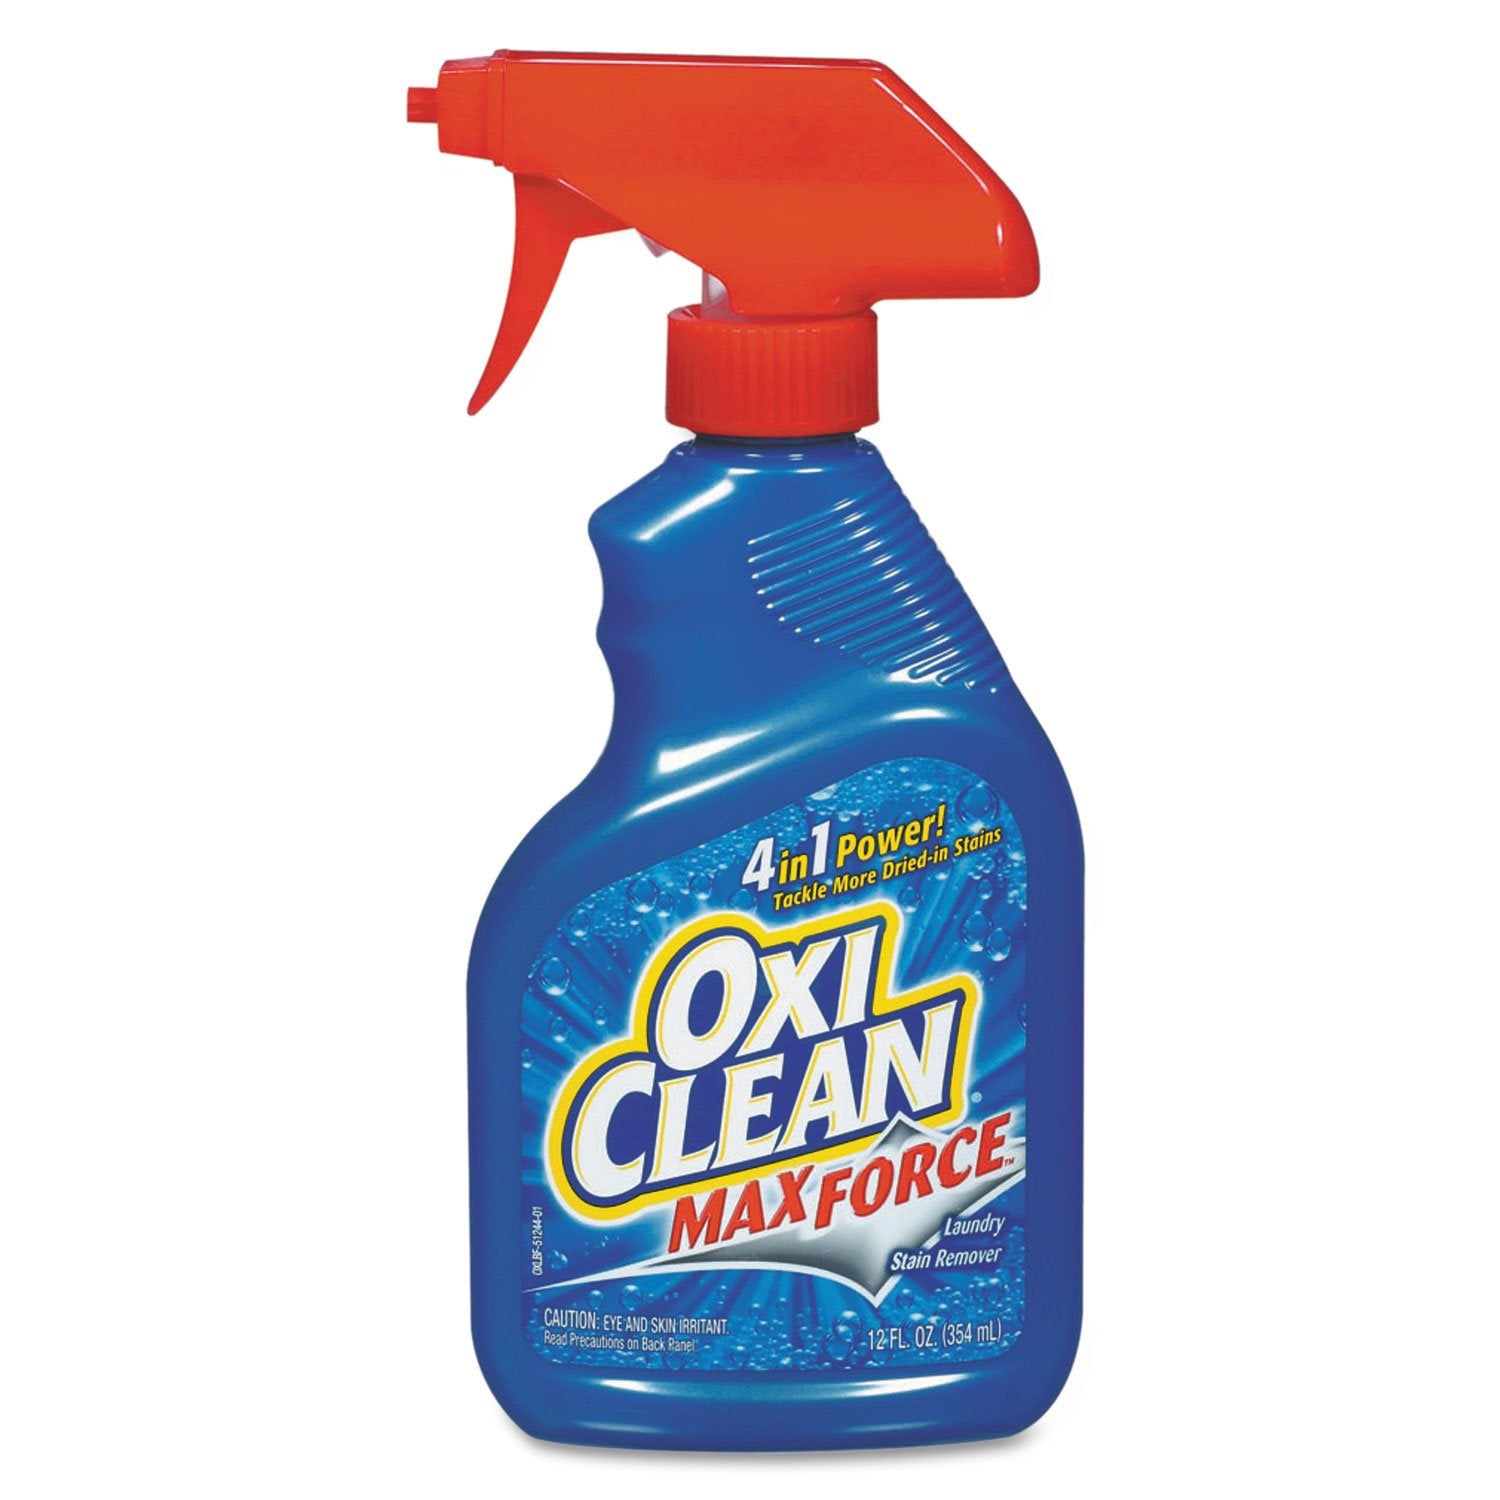 OxiClean 5703700070CT Max Force Stain Remover, 12 fl oz Spray Bottle (Case of 12)